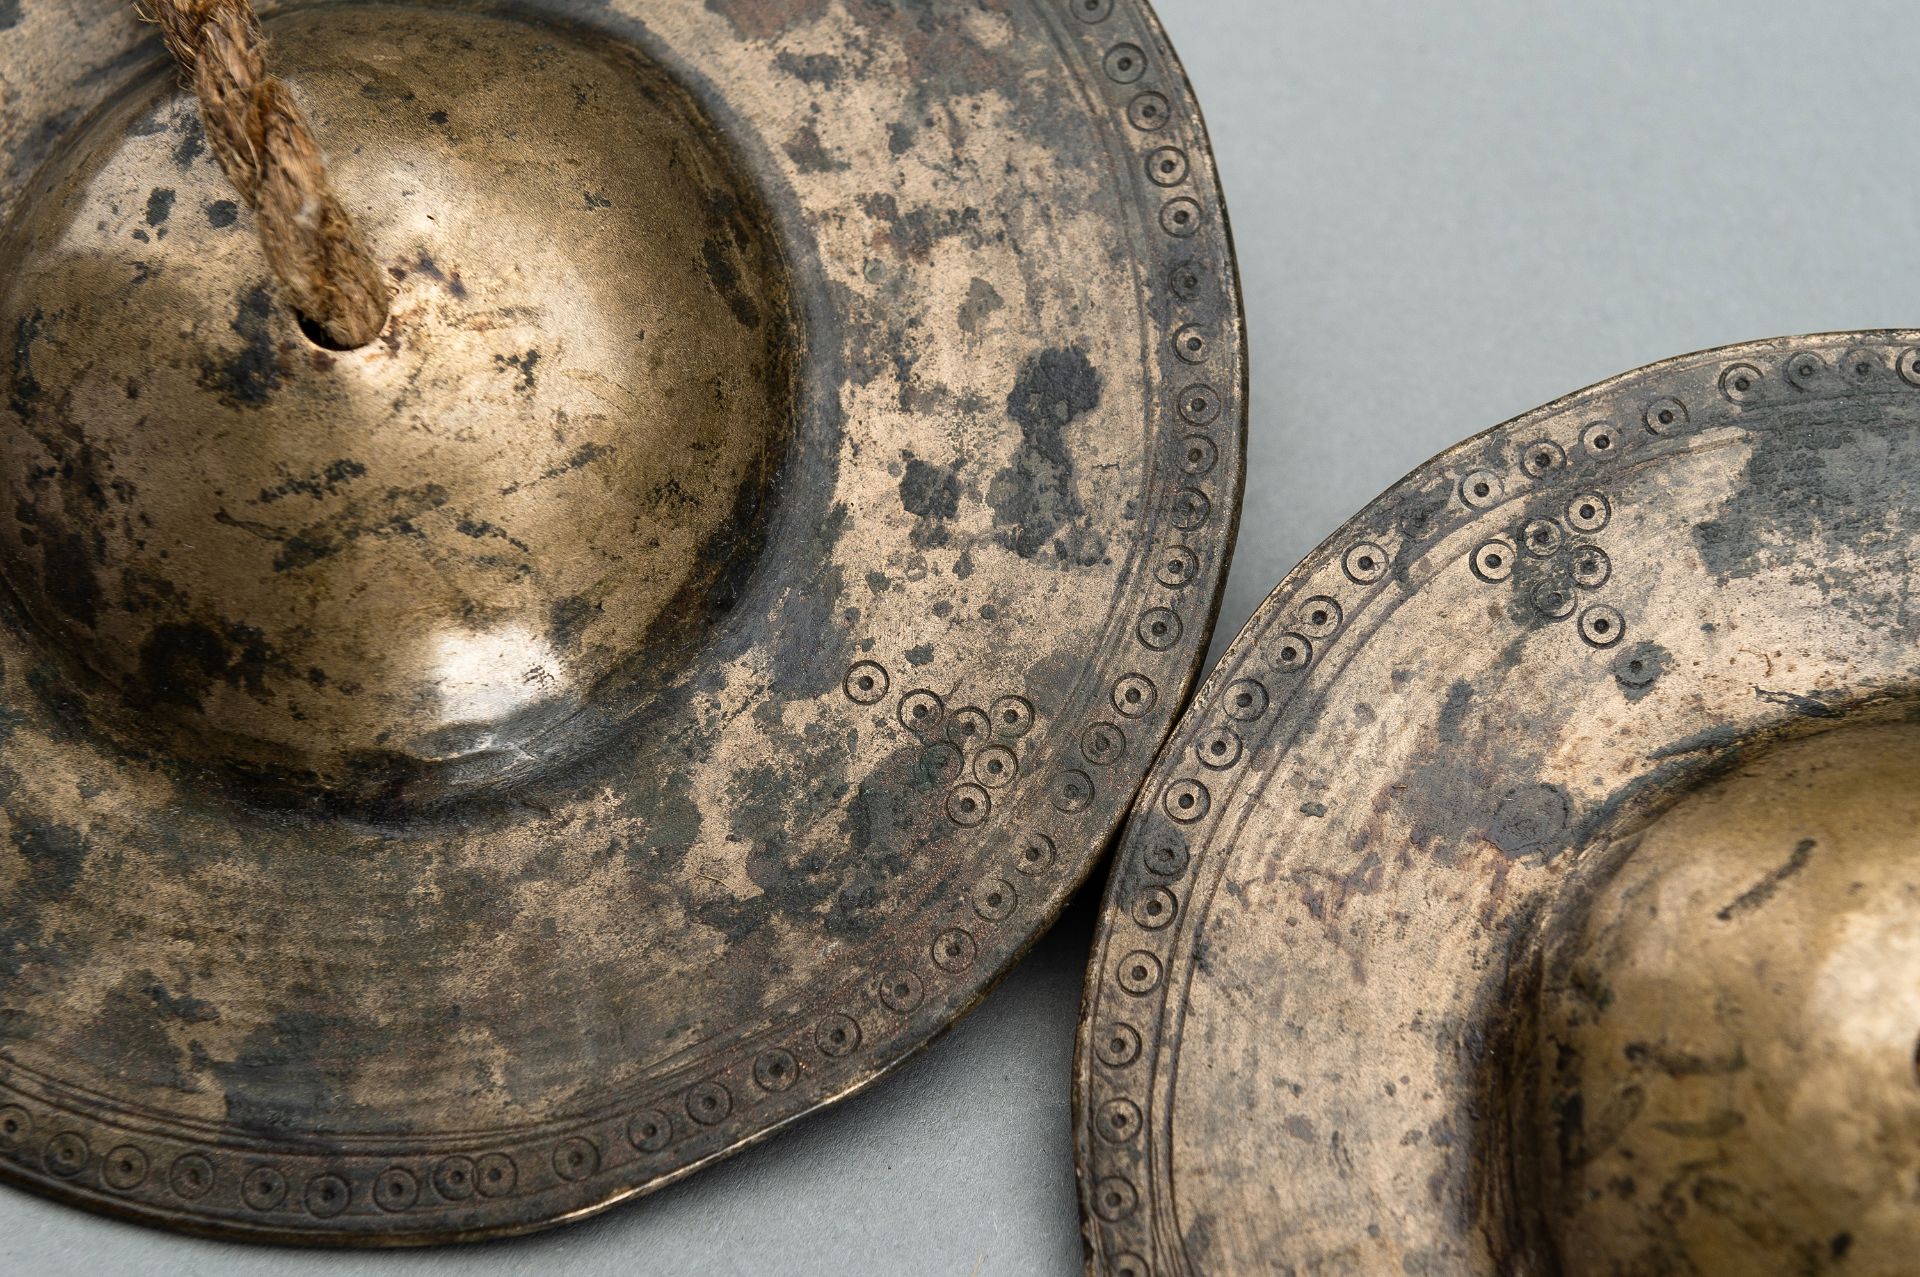 A RARE PAIR OF BRONZE CYMBALS, 19th CENTURY - Image 6 of 10